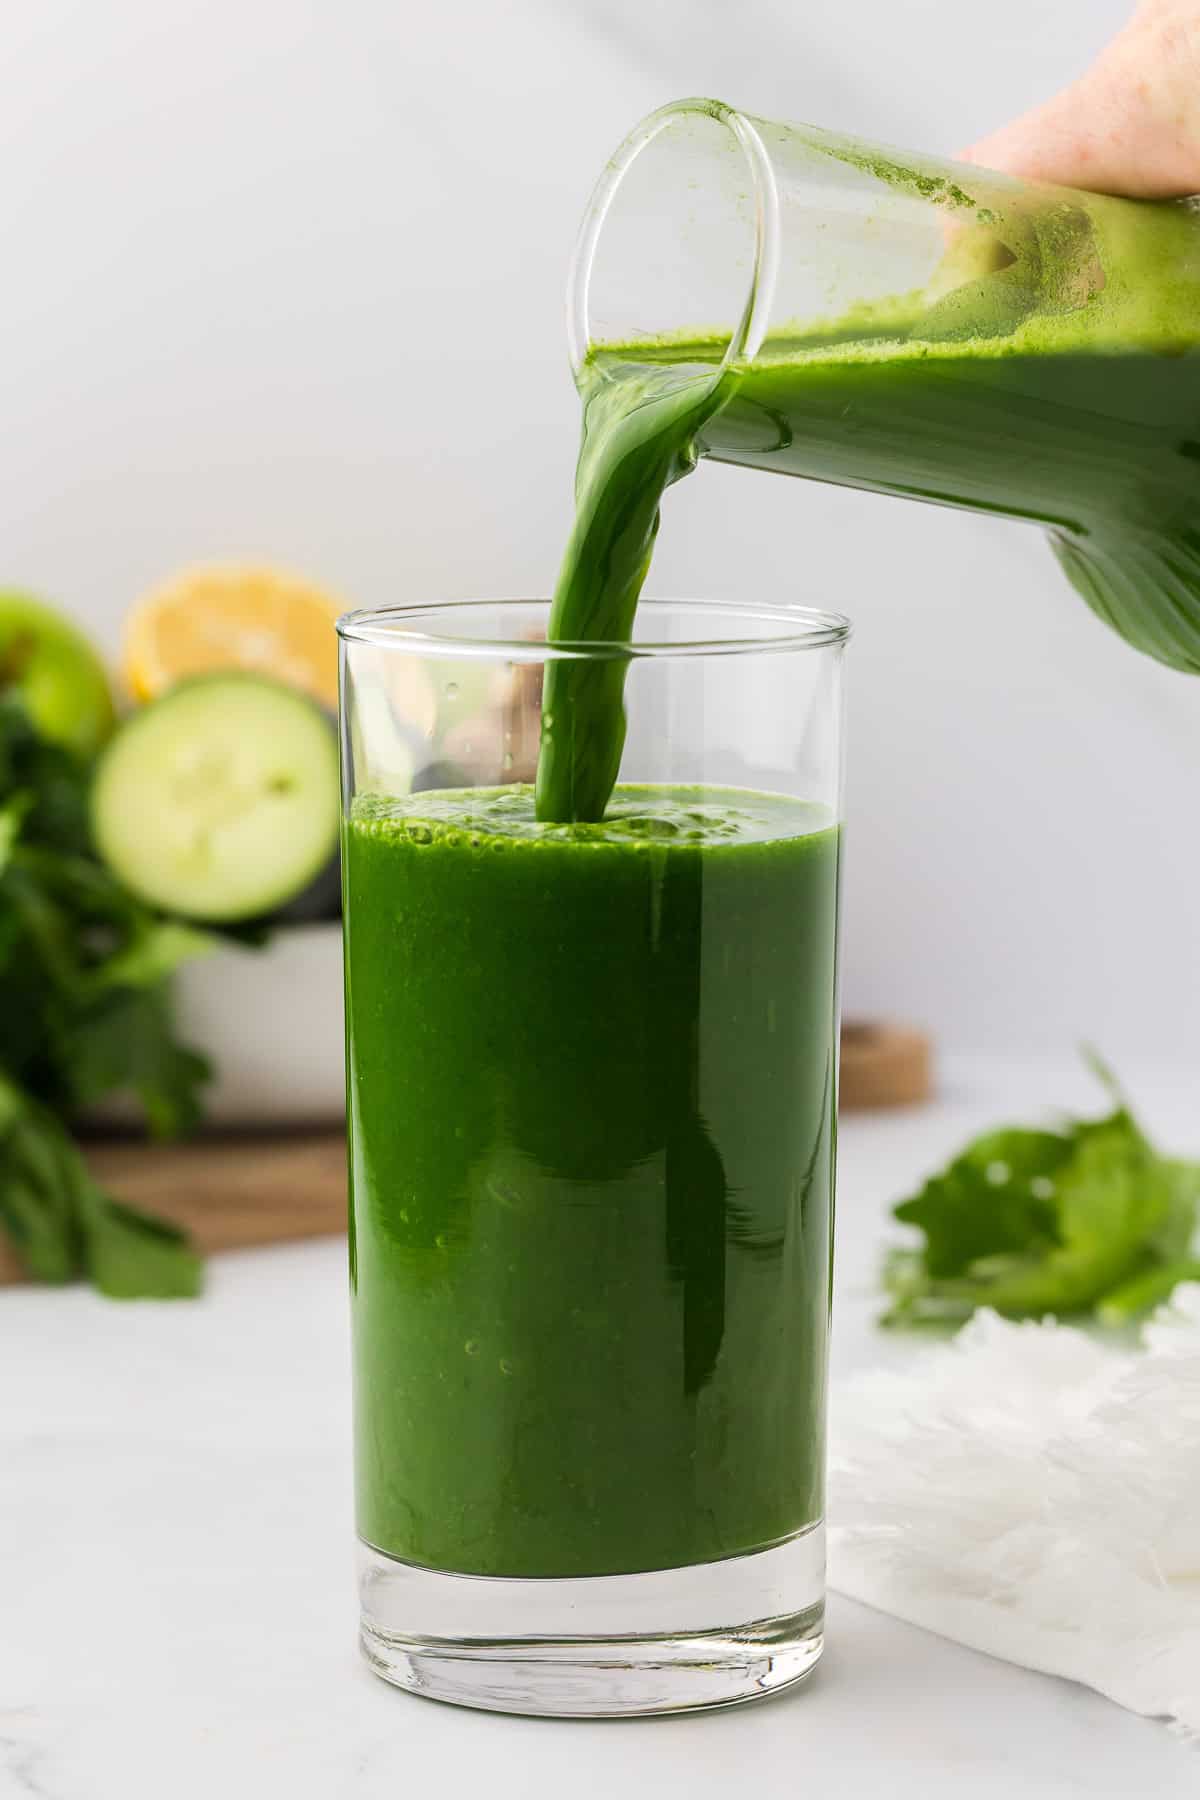 pouring green juice into a glass